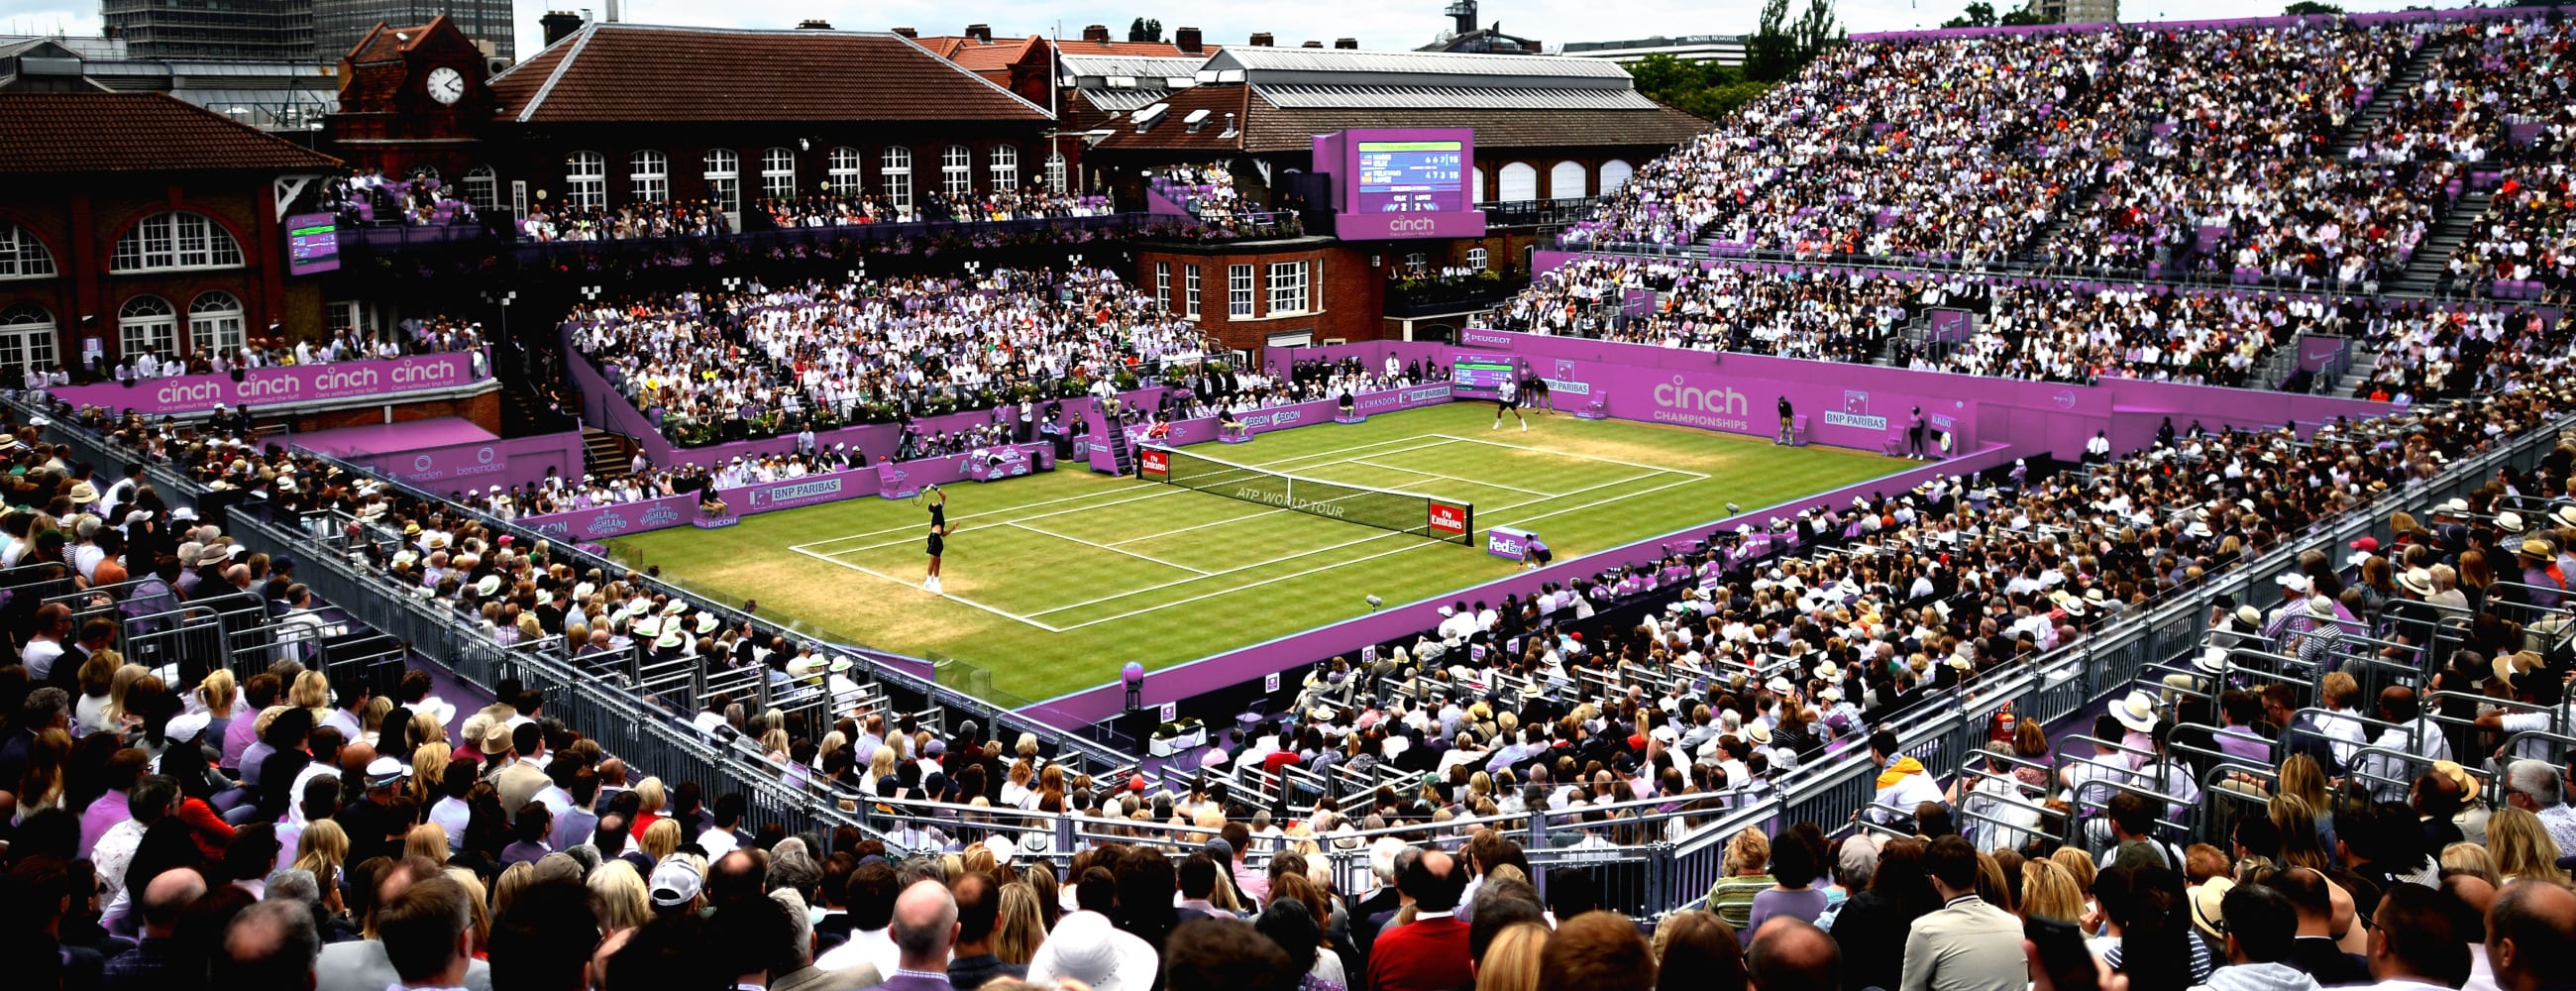 2023 Queen's Club Championships Schedule of Play & How to Watch on TV